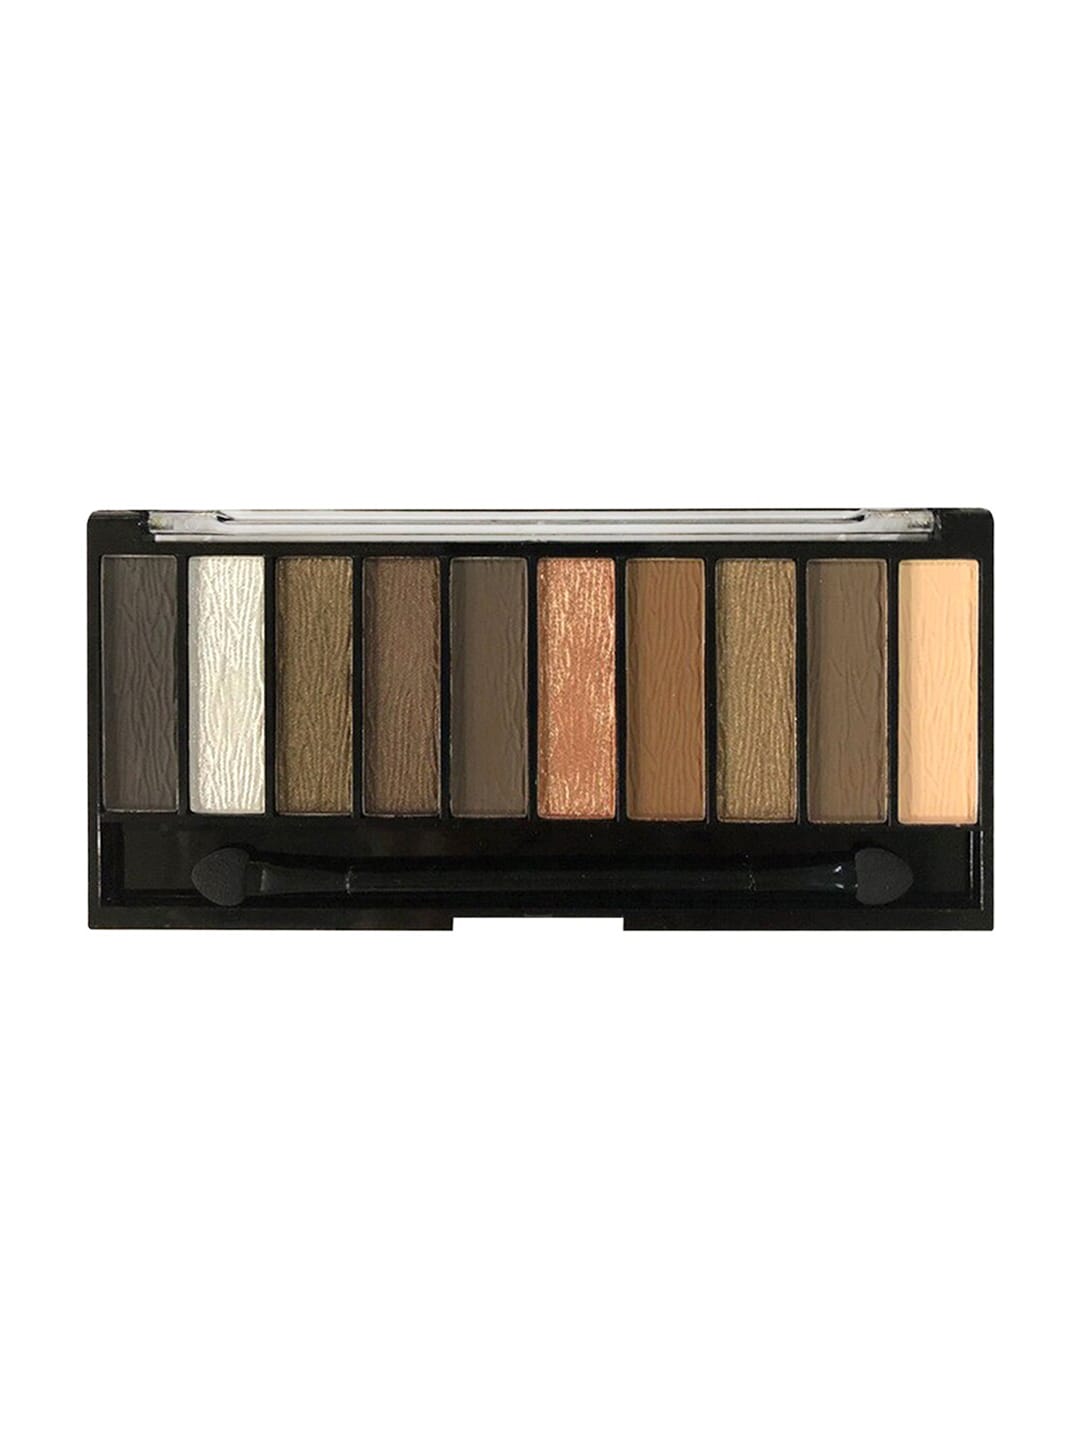 Sivanna Colors Pro Eyeshadow Palette - HF537 03 Price in India